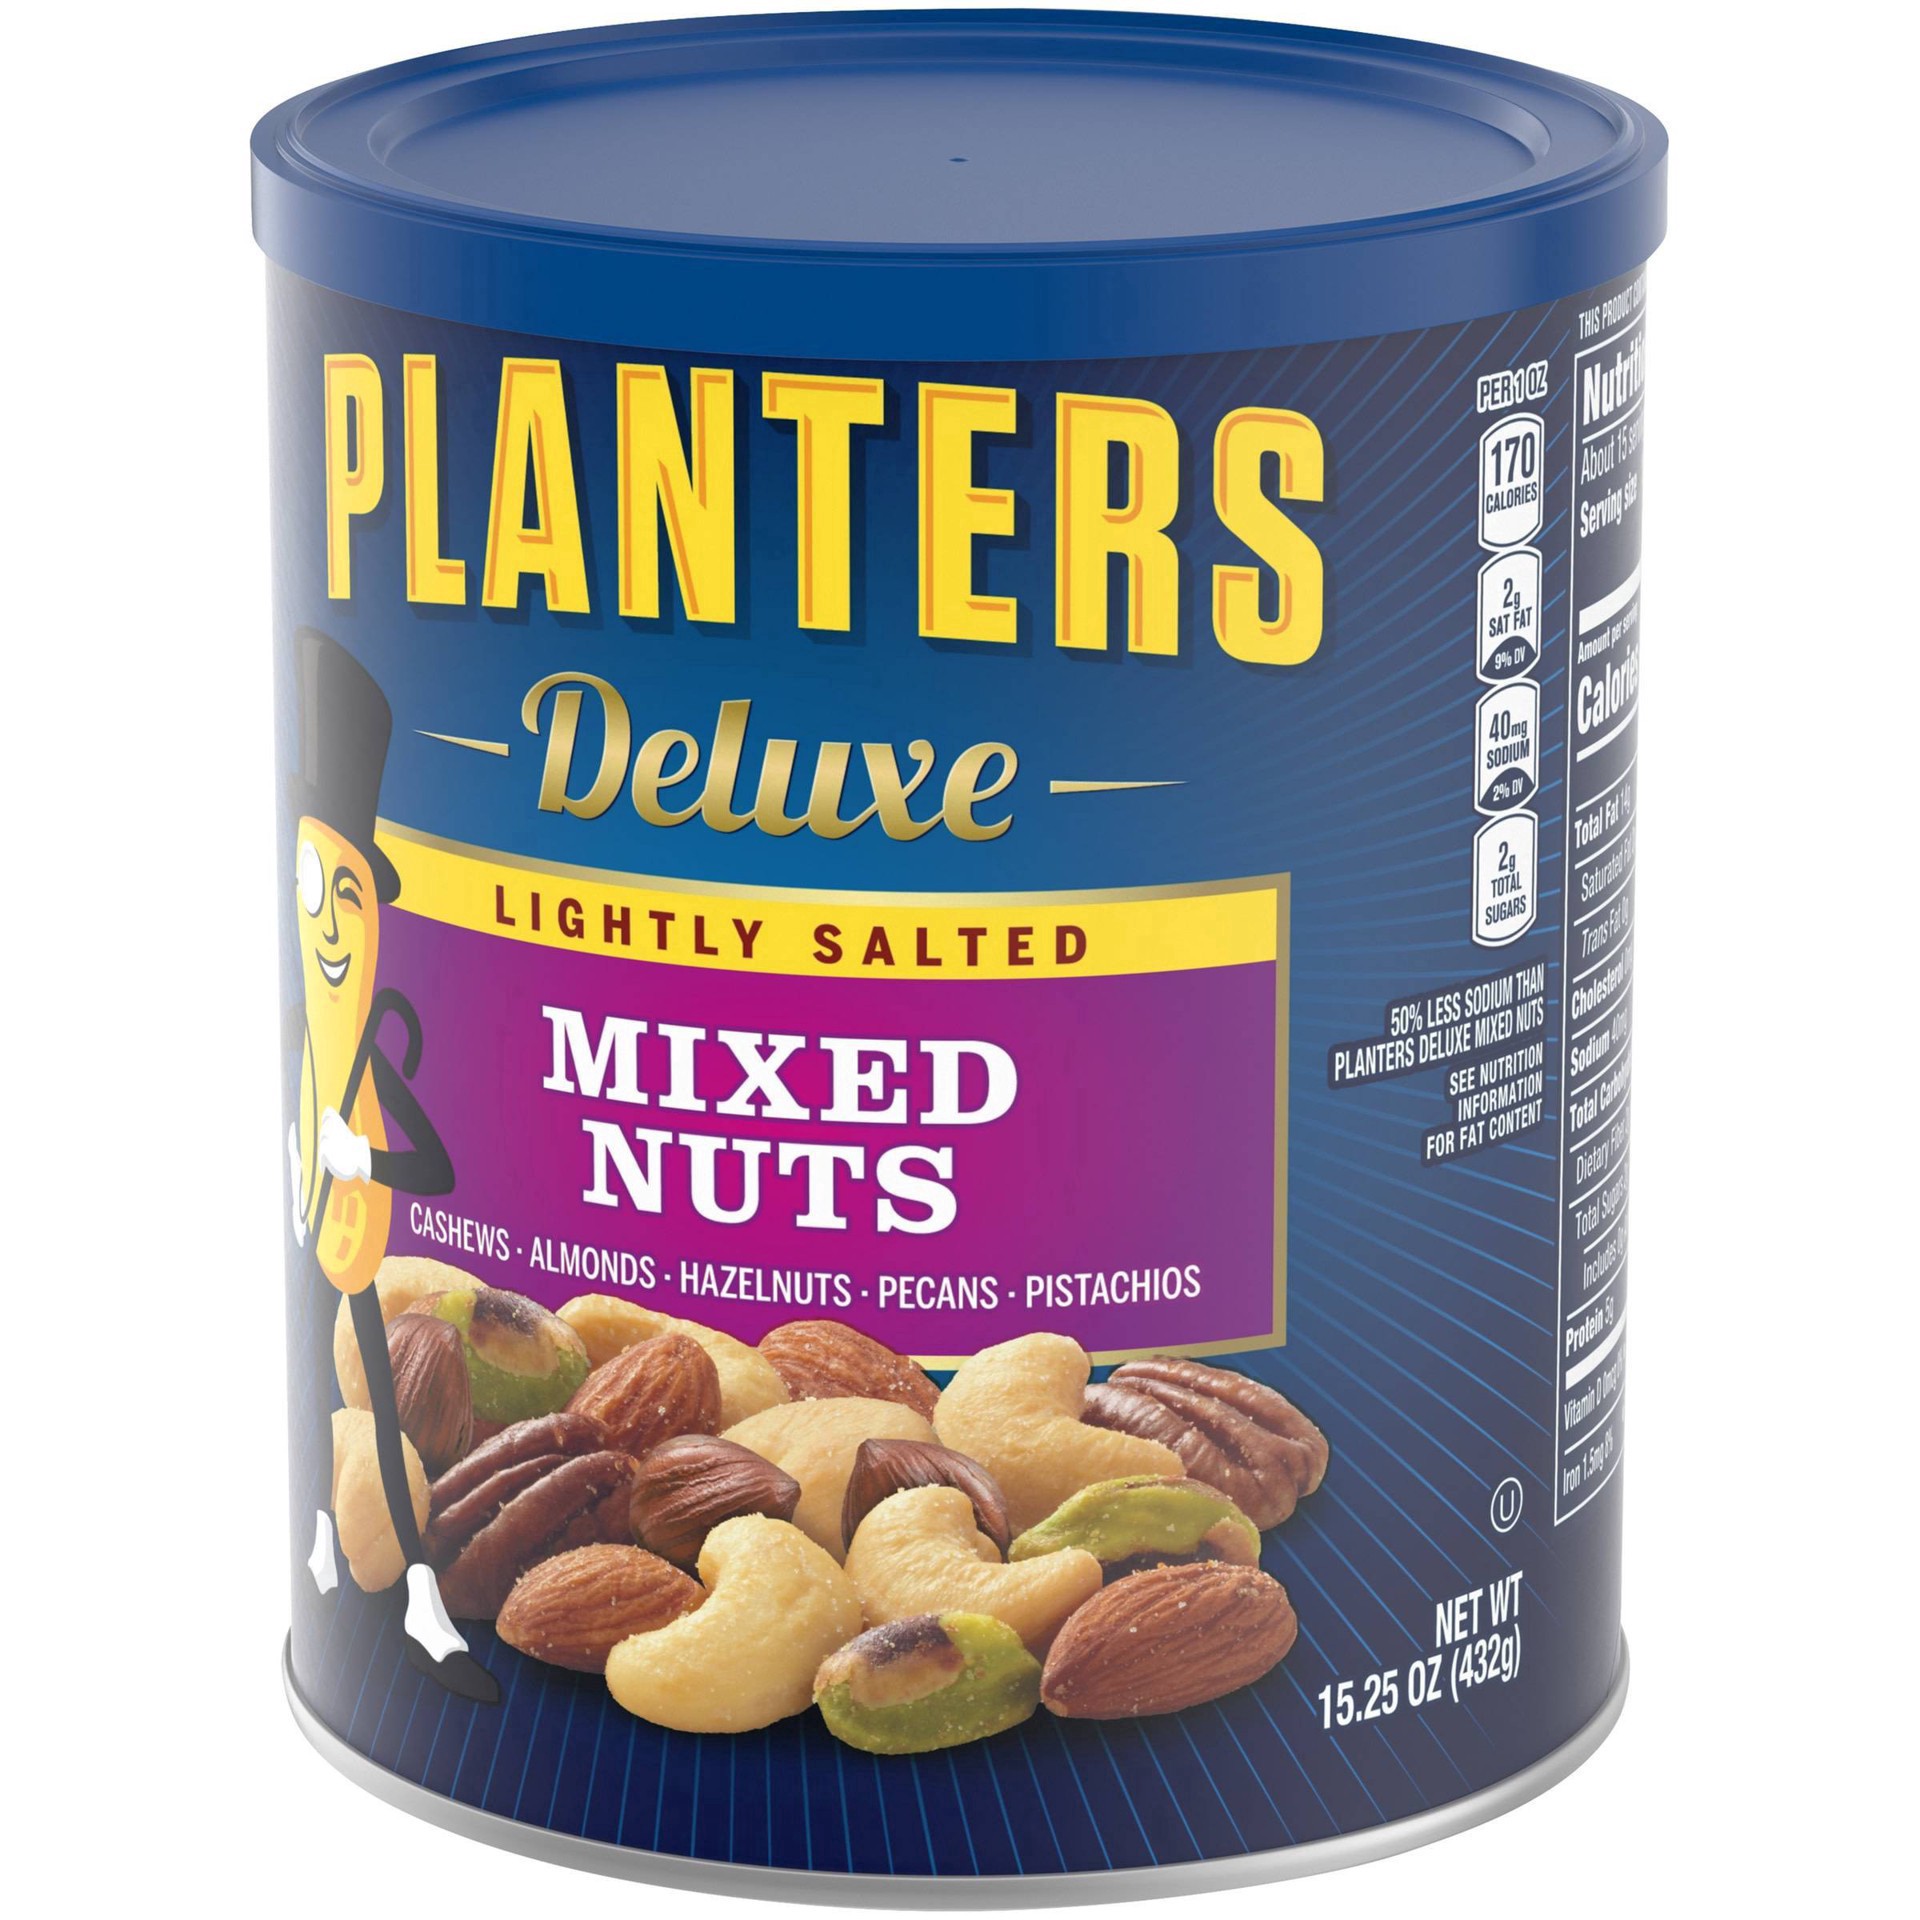 slide 26 of 46, Planters Deluxe Lightly Salted Mixed Nuts 15.25 oz, 15.25 oz